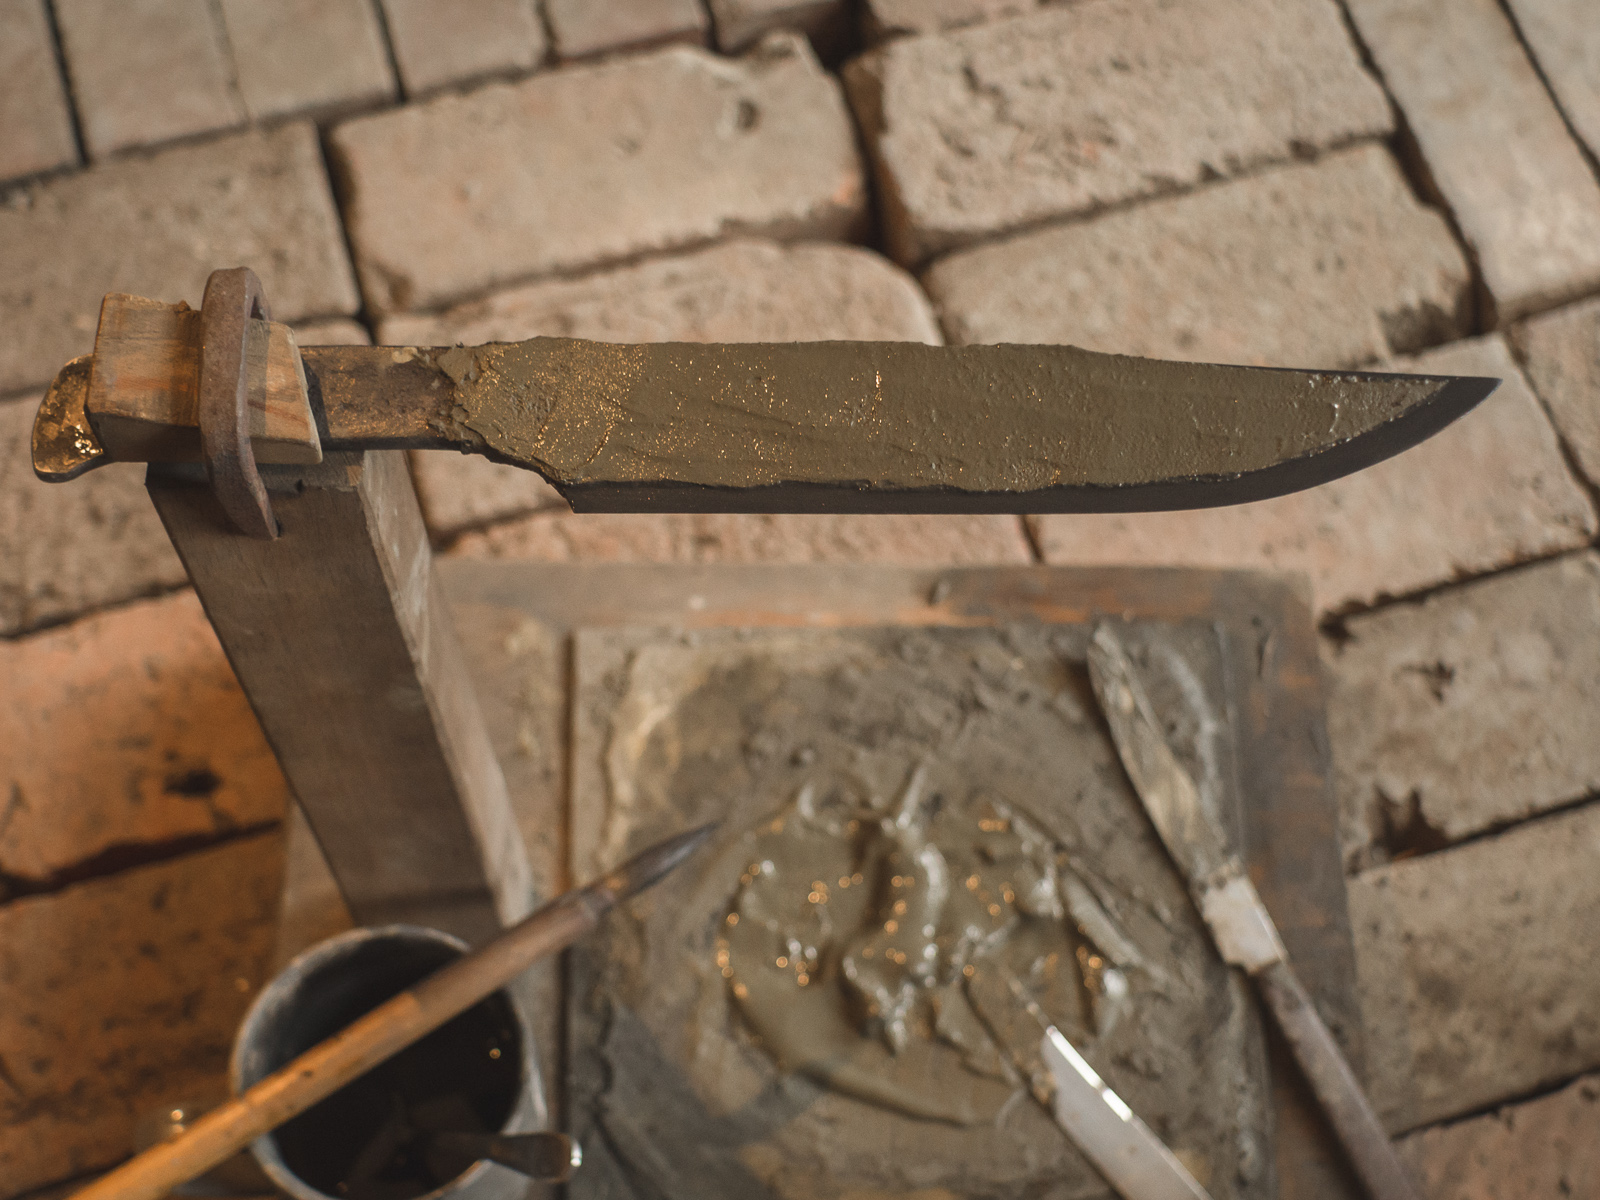 Island Blacksmith: Hand crafted camp bowie made from reclaimed steel using traditional techniques